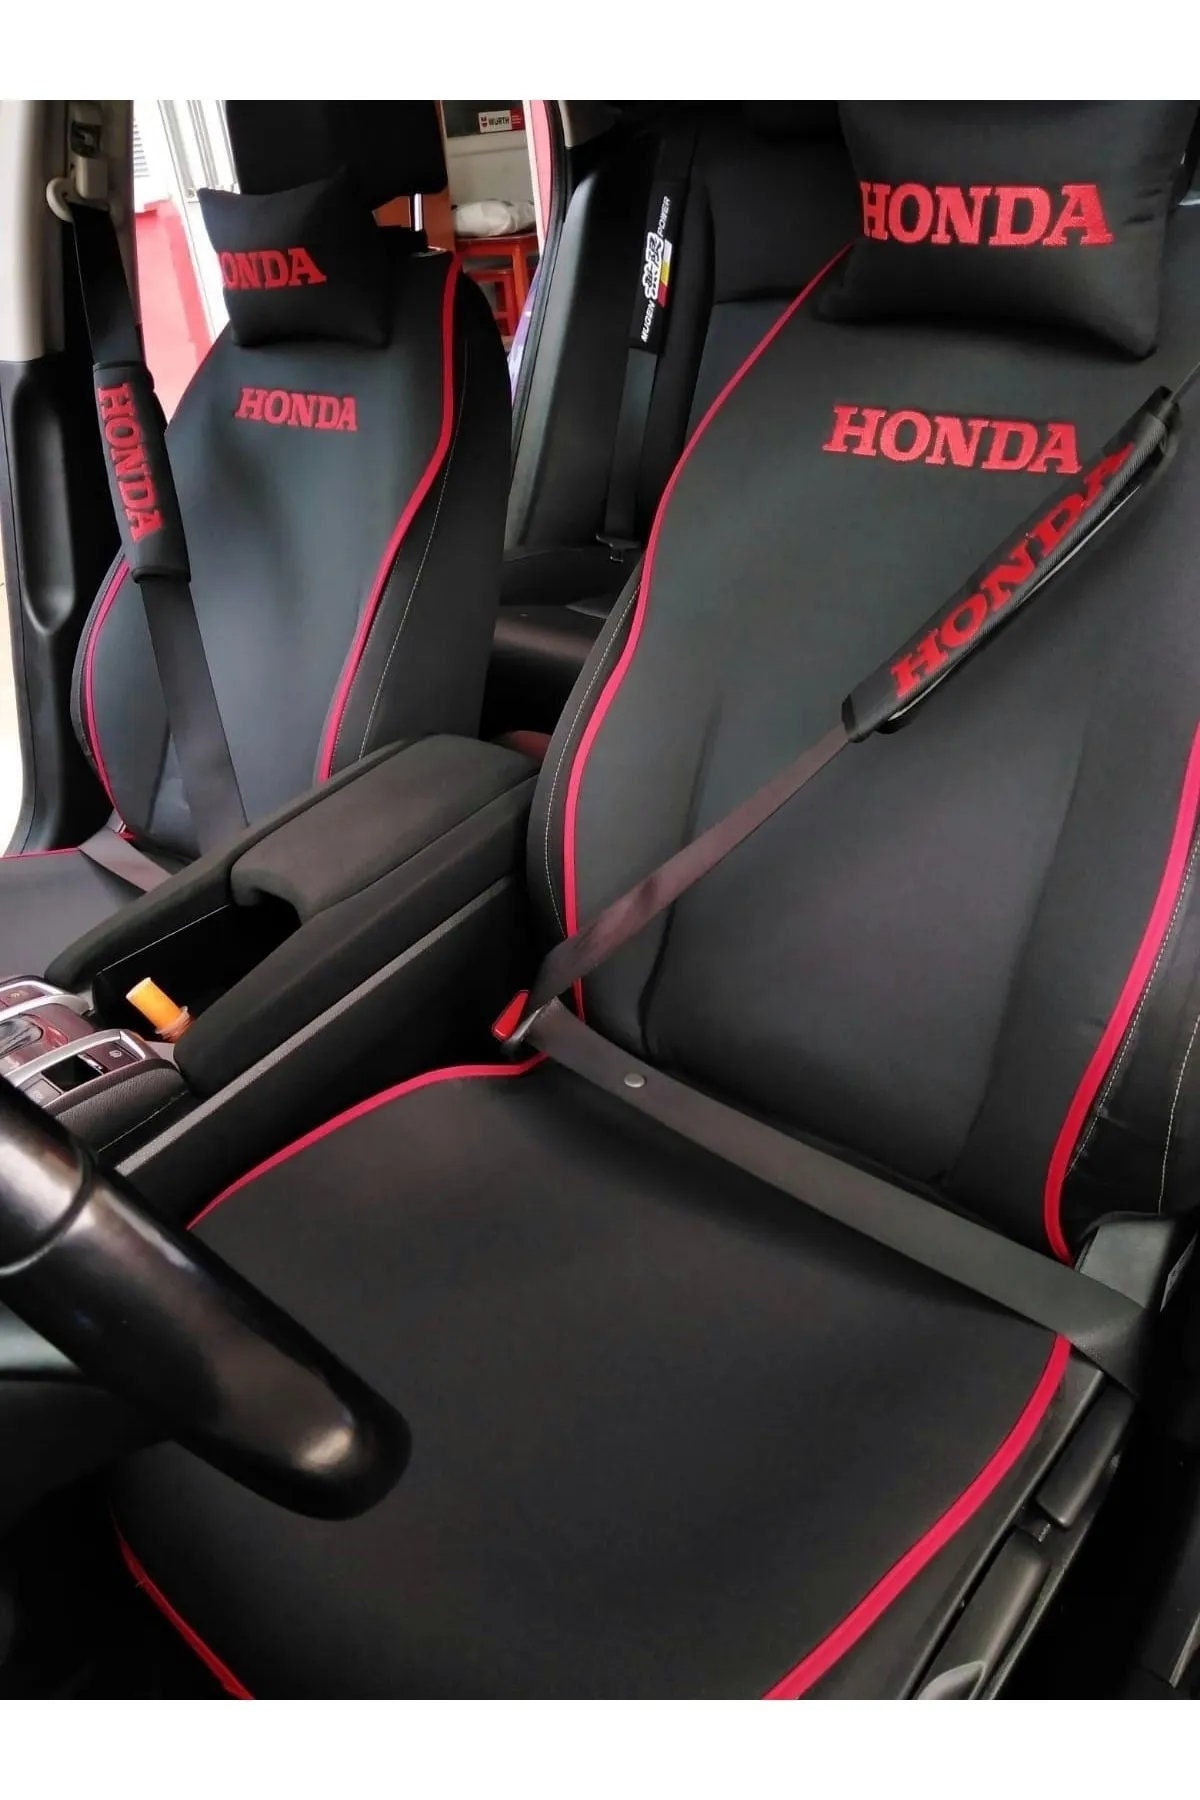 Premium PU Leather Red Seat Cushions For Honda Civic 11th Gen With